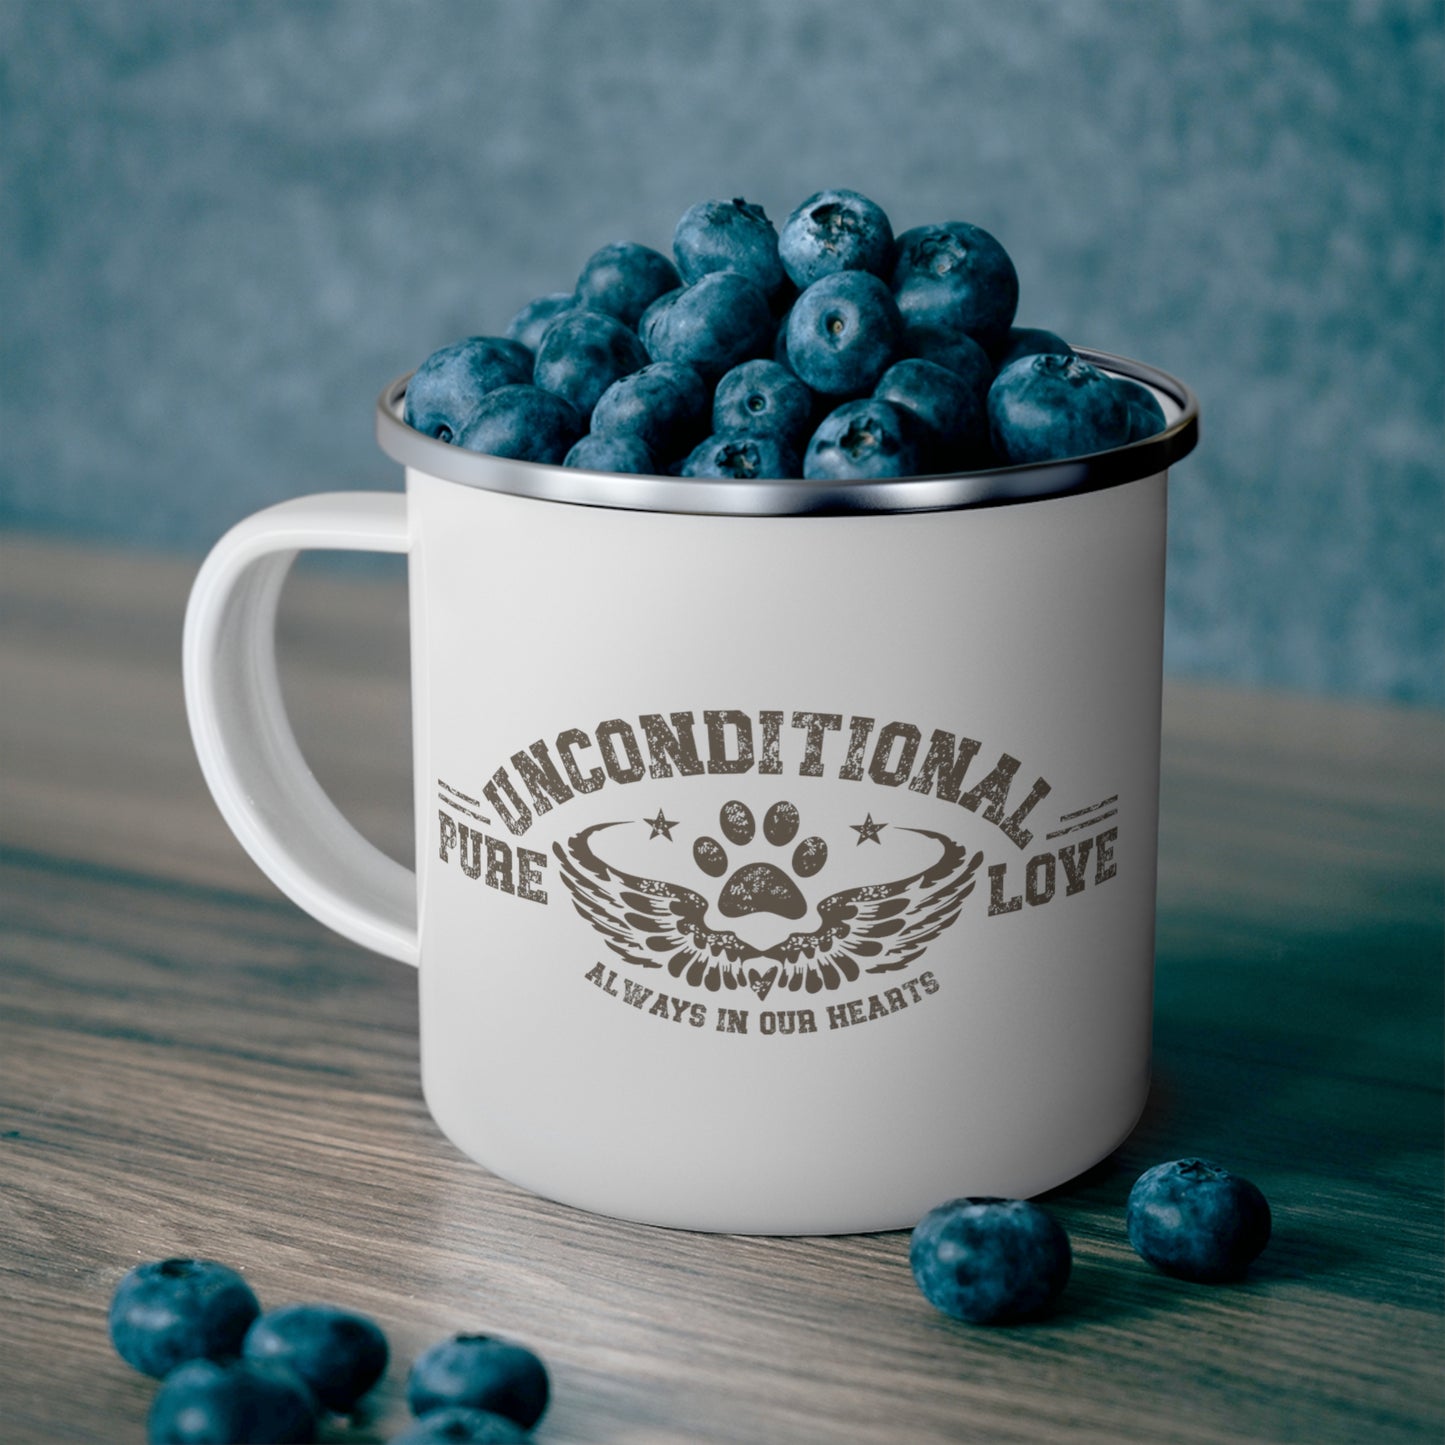  On a table, there's a Dogs Pure Love 12 oz enamel mug with the print 'Unconditional Pure Love, always and forever,' slogan, filled with blueberries.